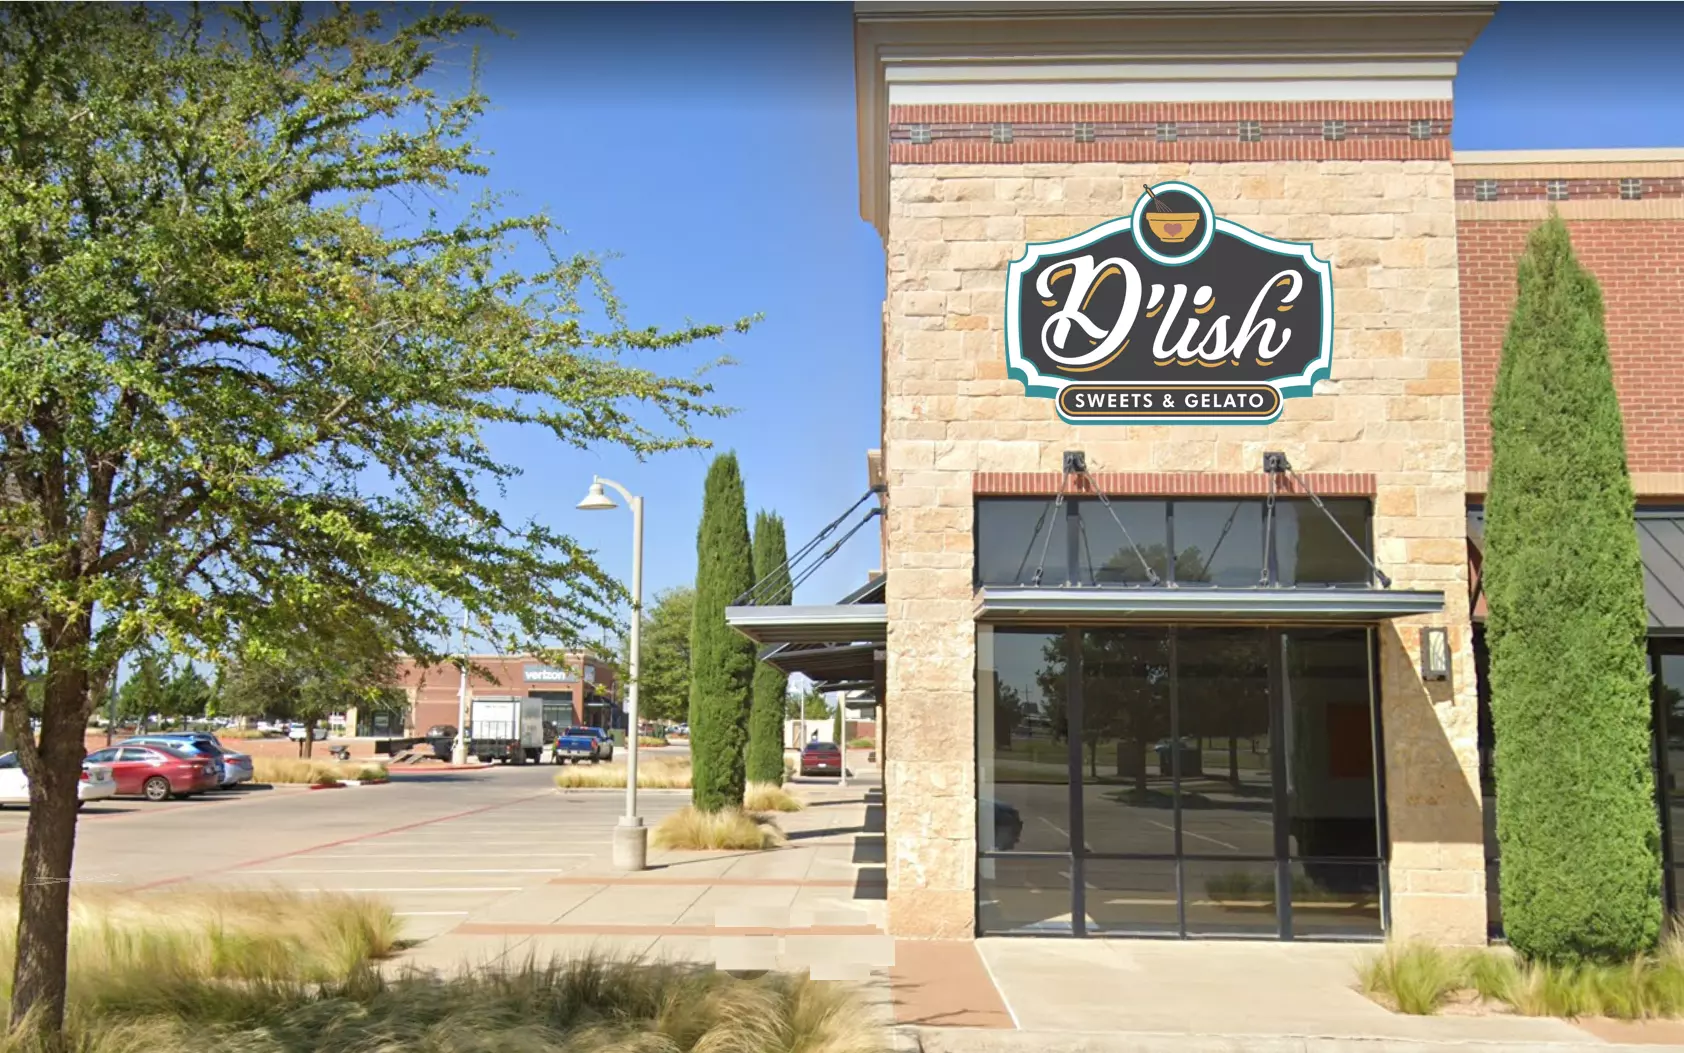 A New Made From Scratch Gelato and Sweets Place is Coming to Lubbock pic